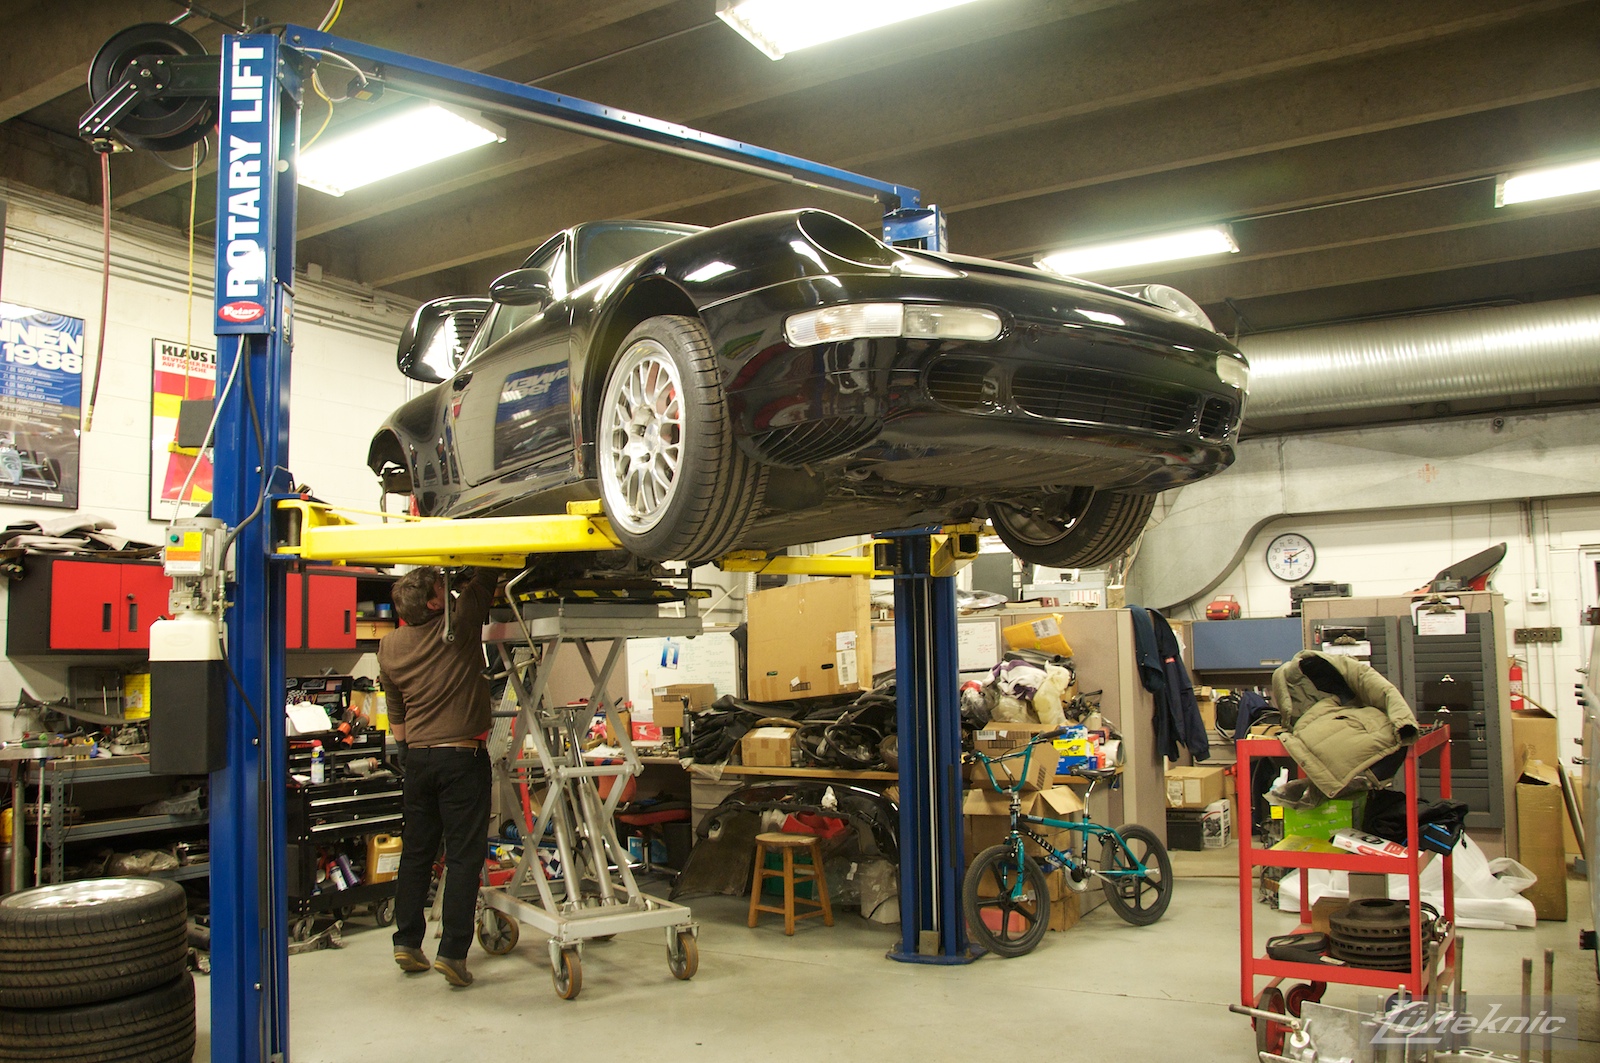 A shot from the front showing a 993 Turbo on a lift with the engine stand lifting the driveline into the car